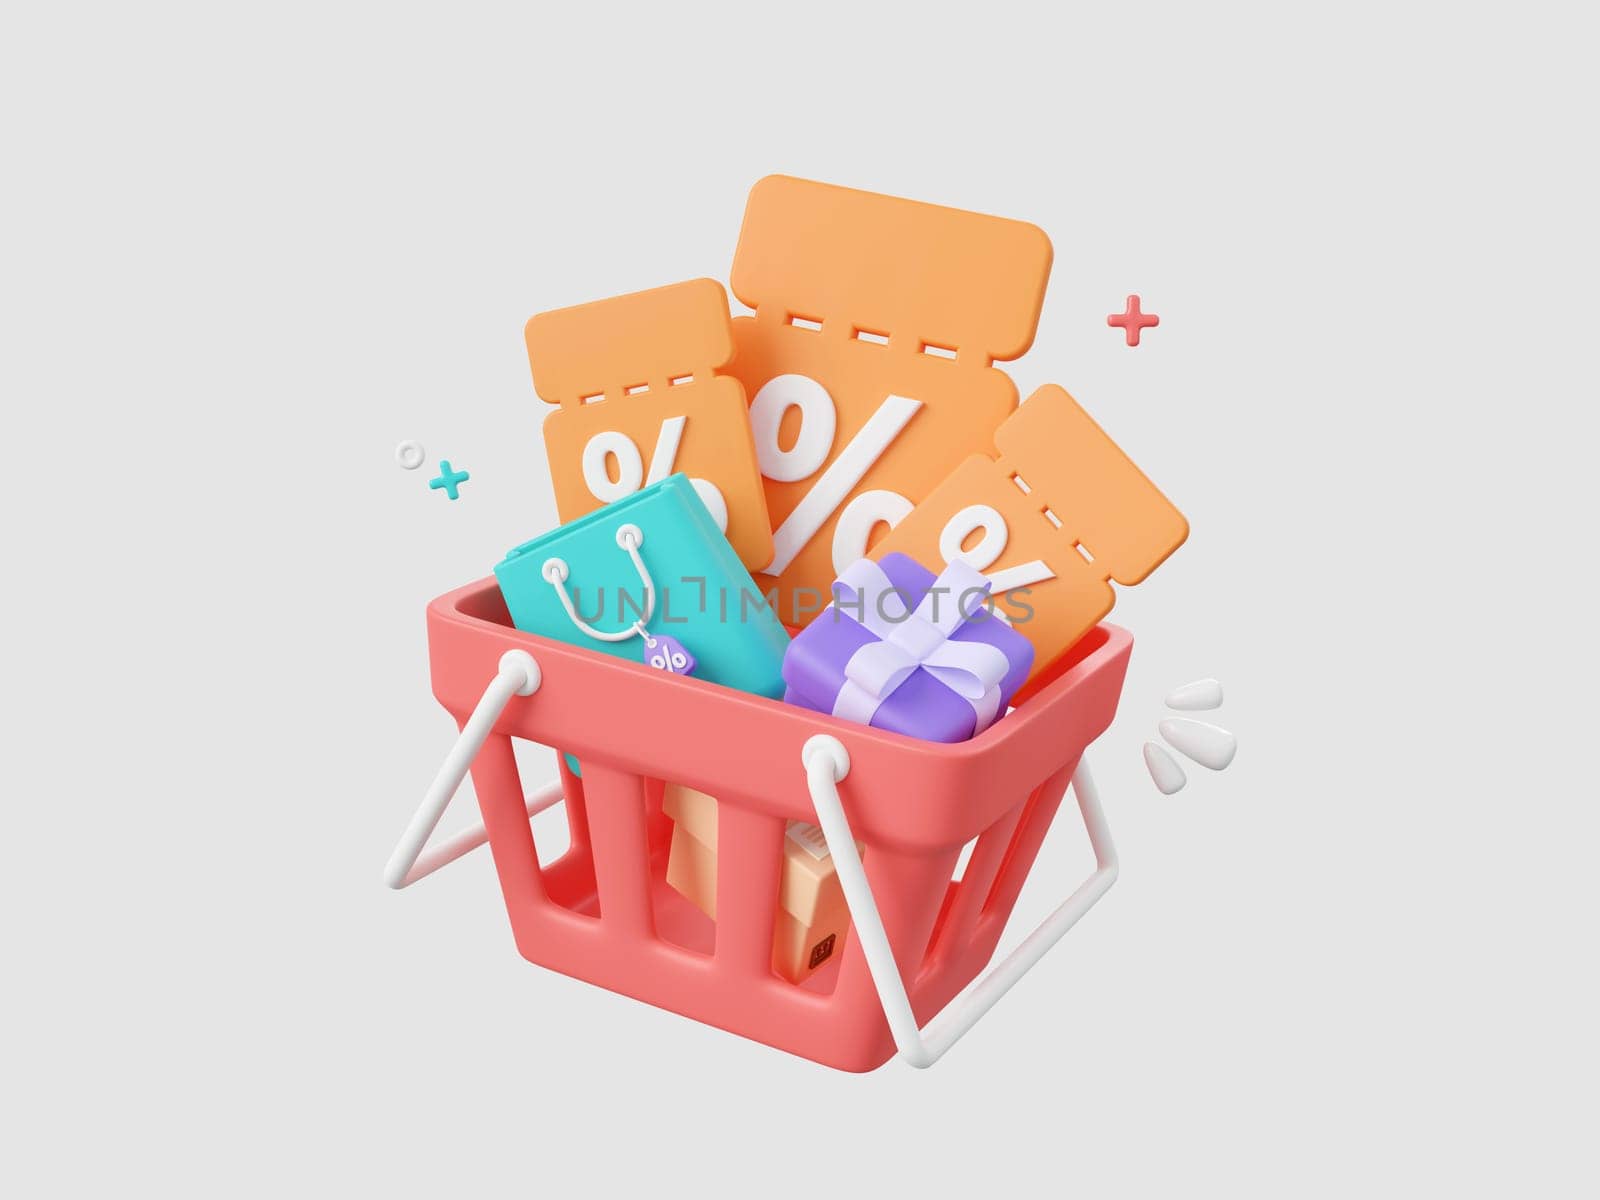 3d cartoon design illustration of Discount code with shopping bag, parcel box and gift box in shopping basket, Advertising marketing promotion concept. by nutzchotwarut